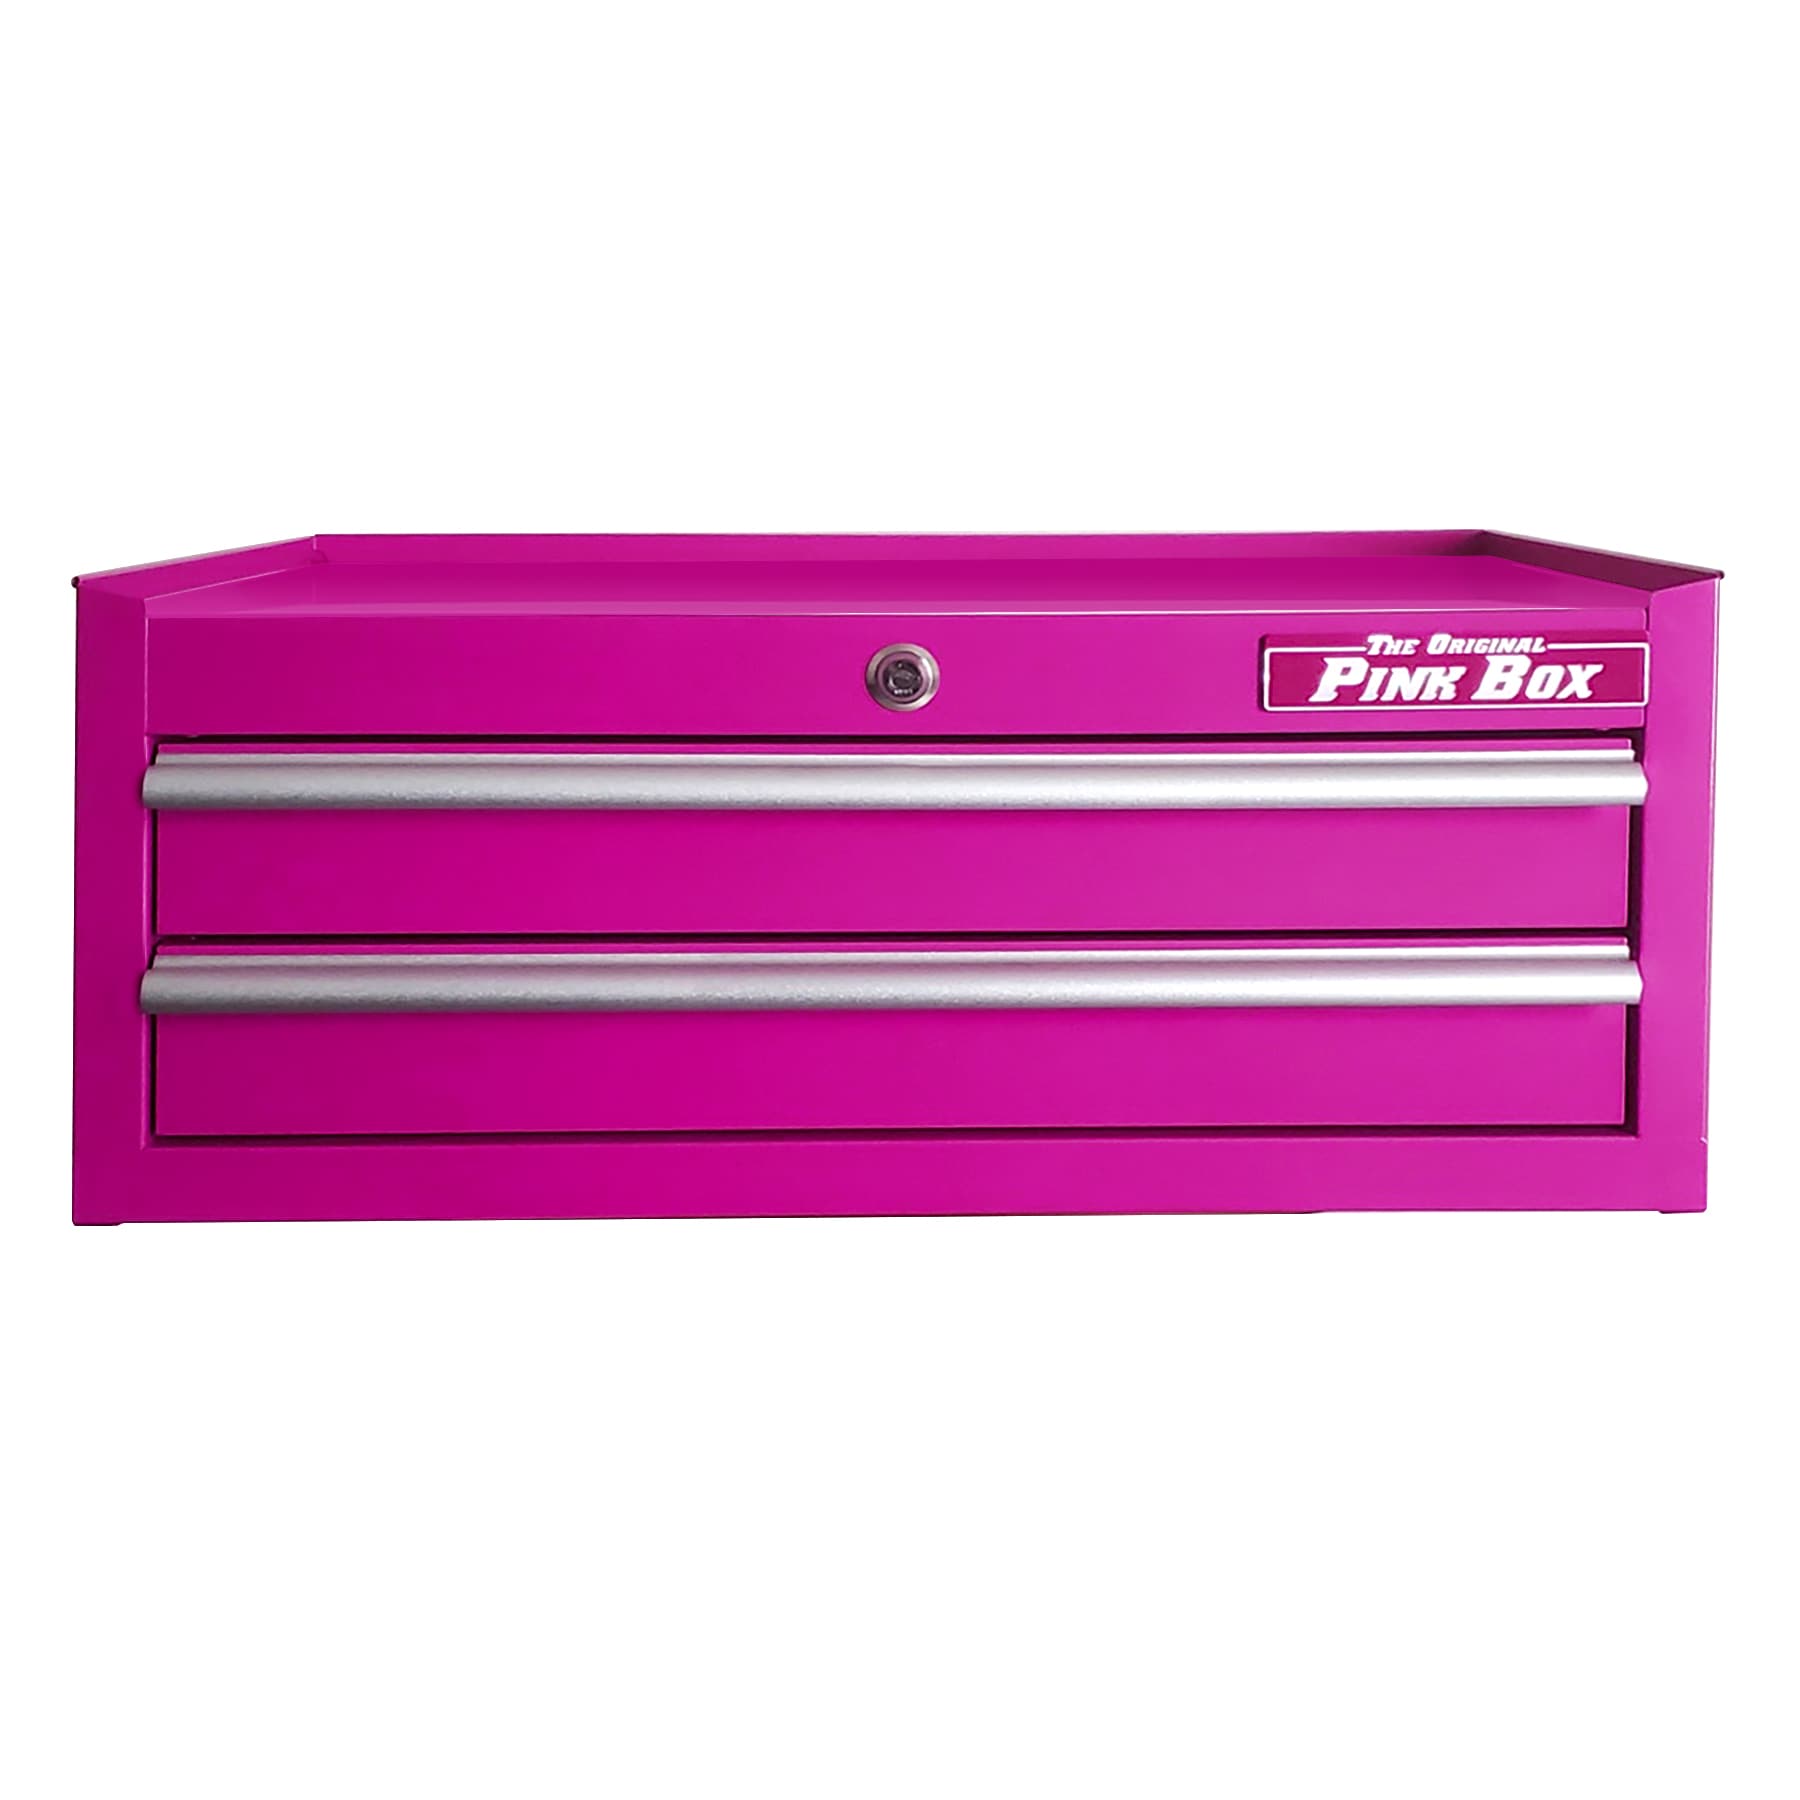 Pink Tool Boxes!!--- gals side--- guys side ( camo , black , lime)